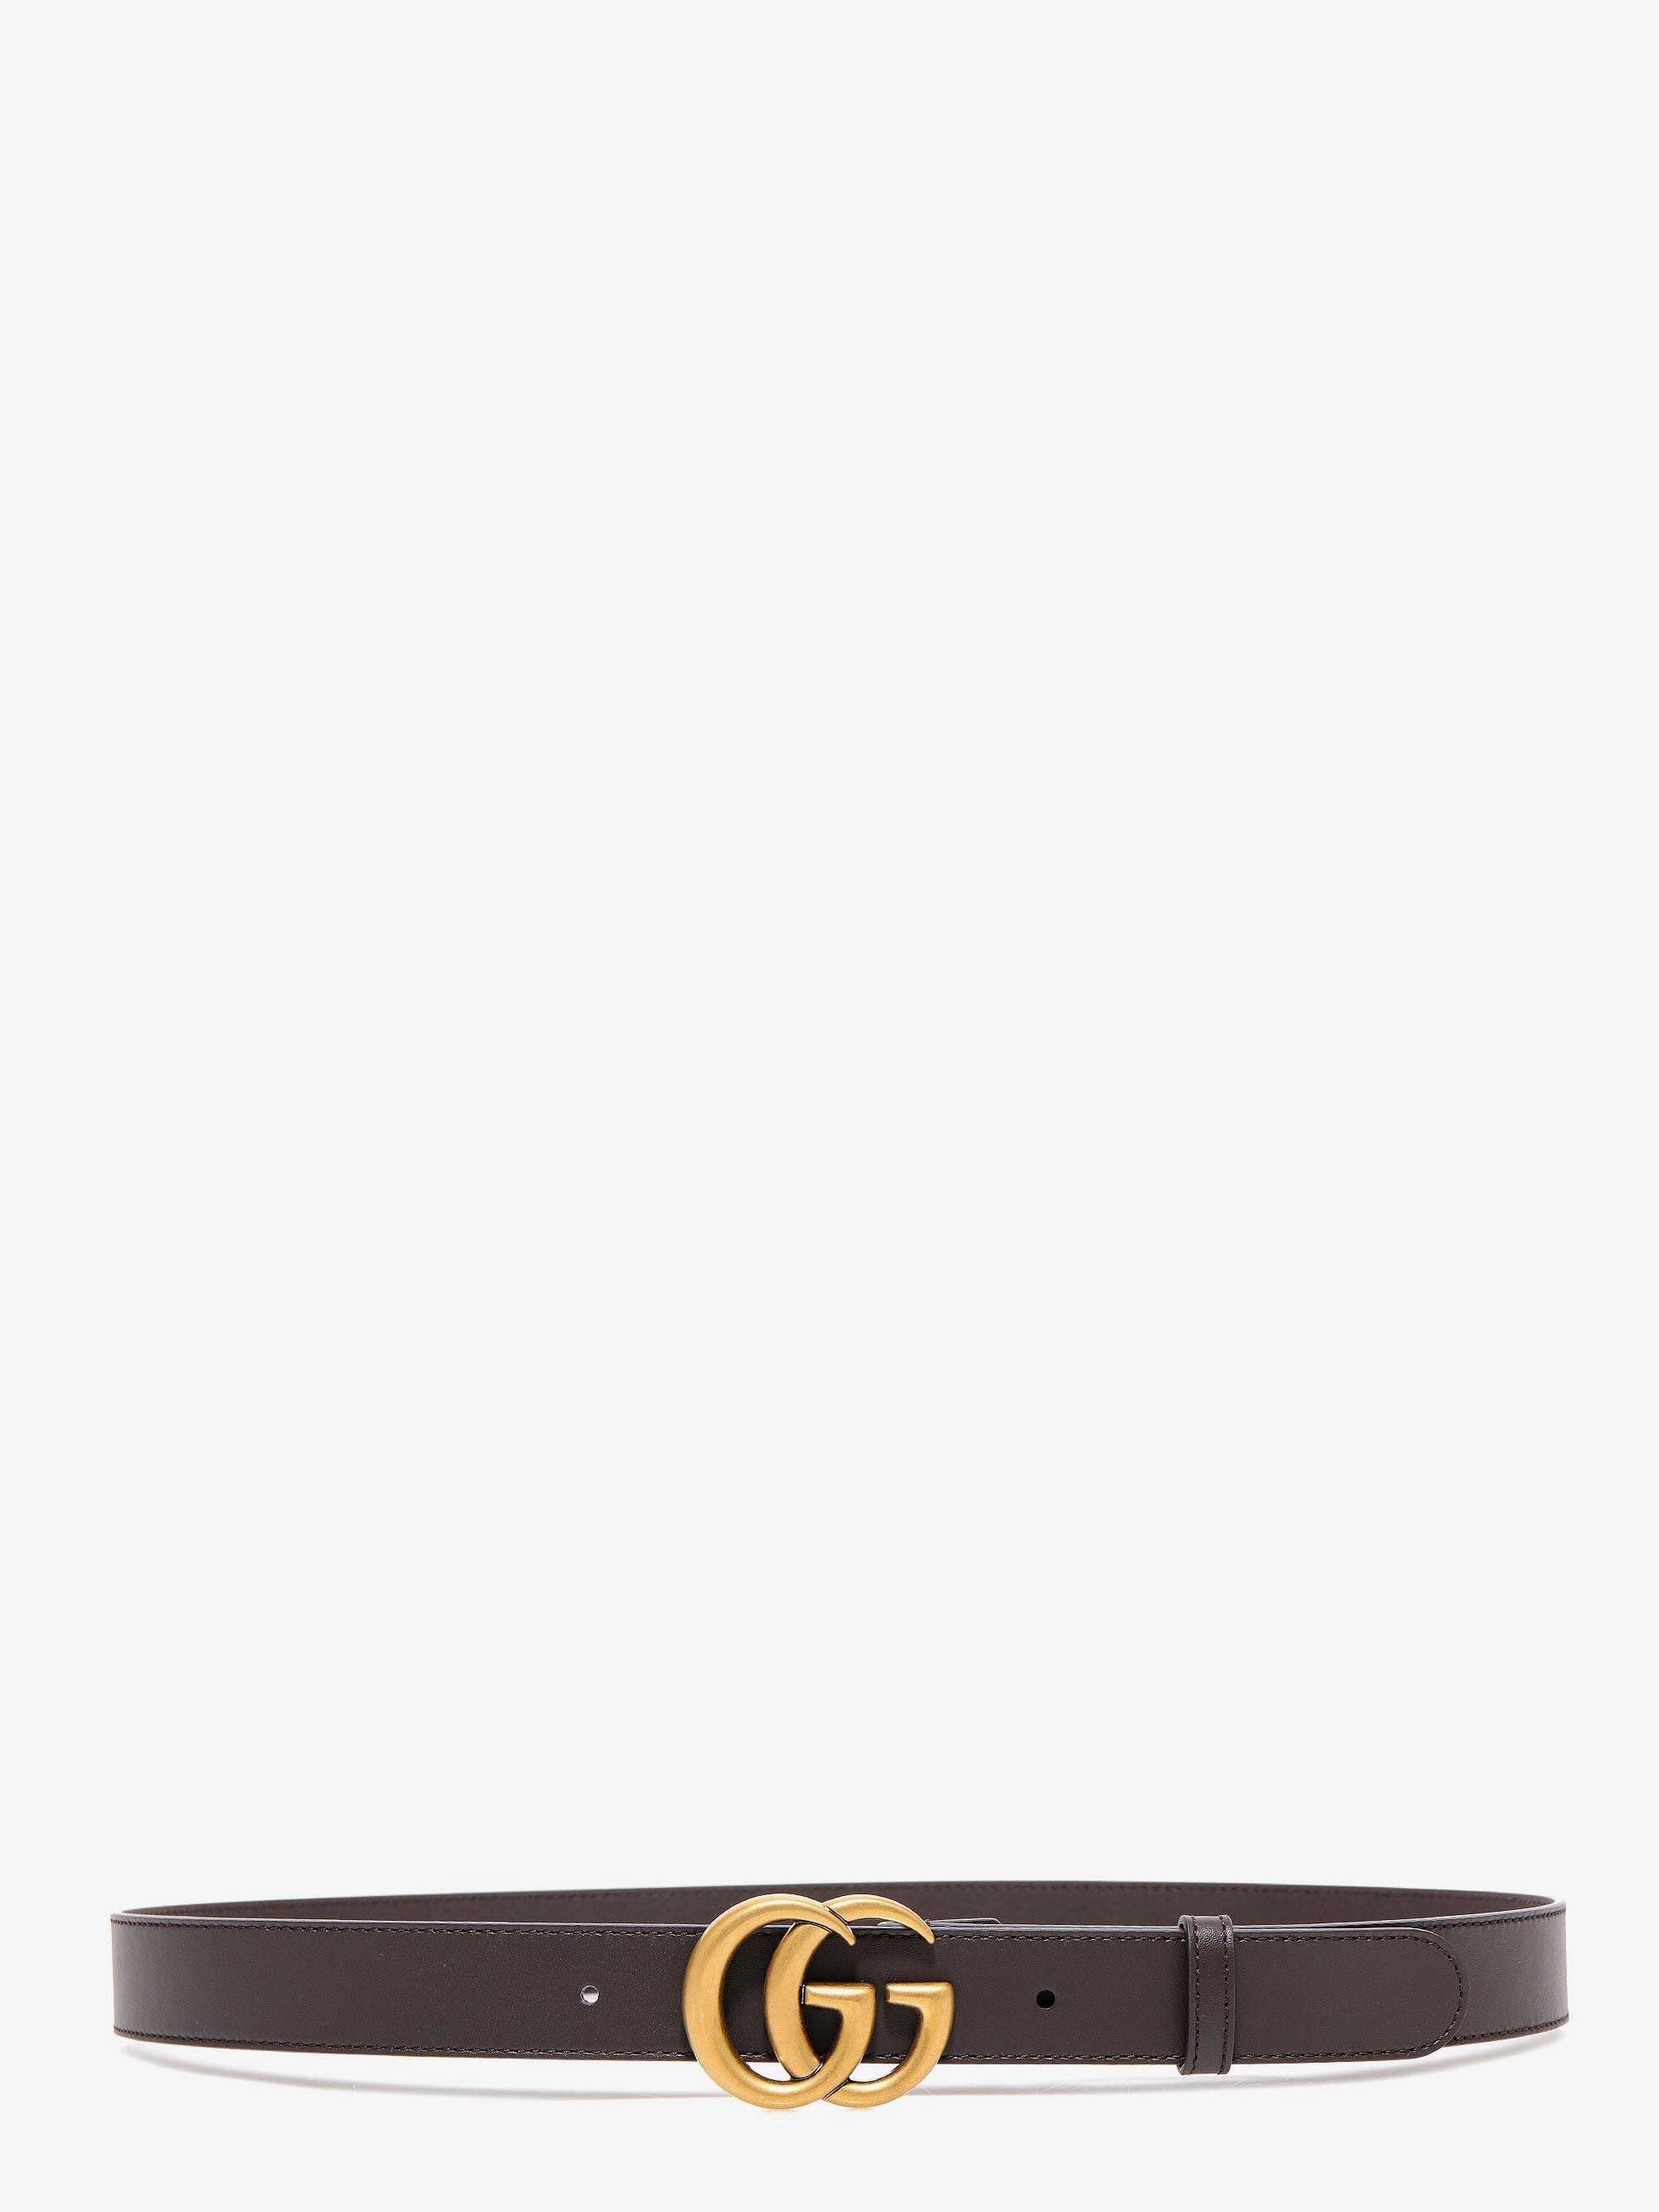 Michael Kors Reversible Logo And Leather Belt - Save 79% - Lyst